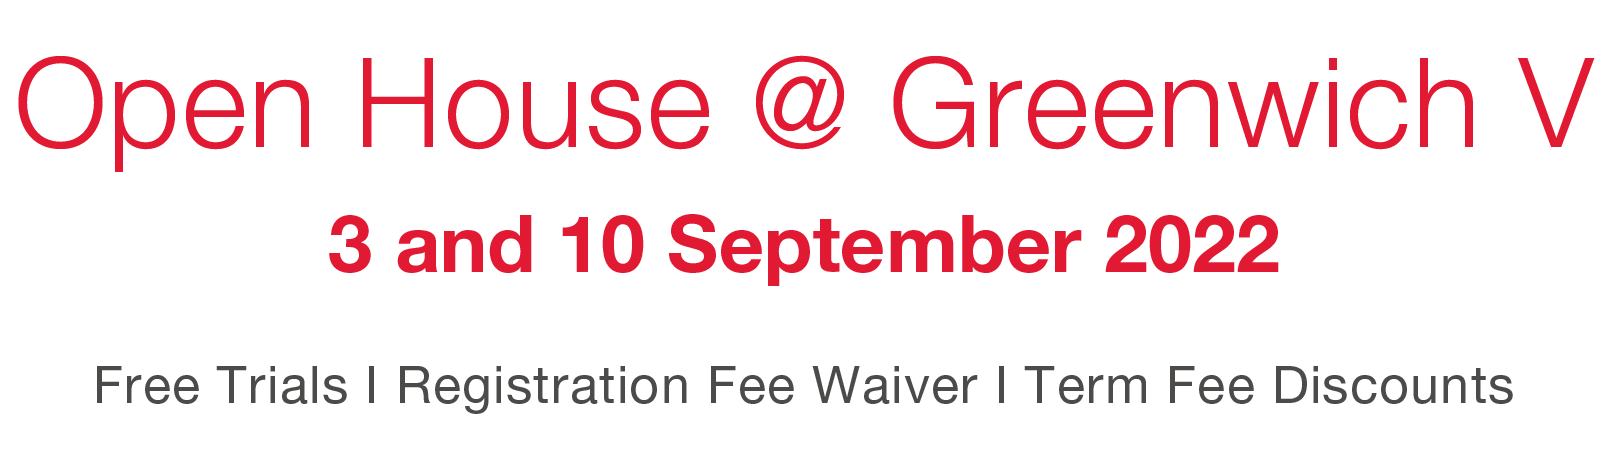 greenwich open house 3 and 10 sept 2022